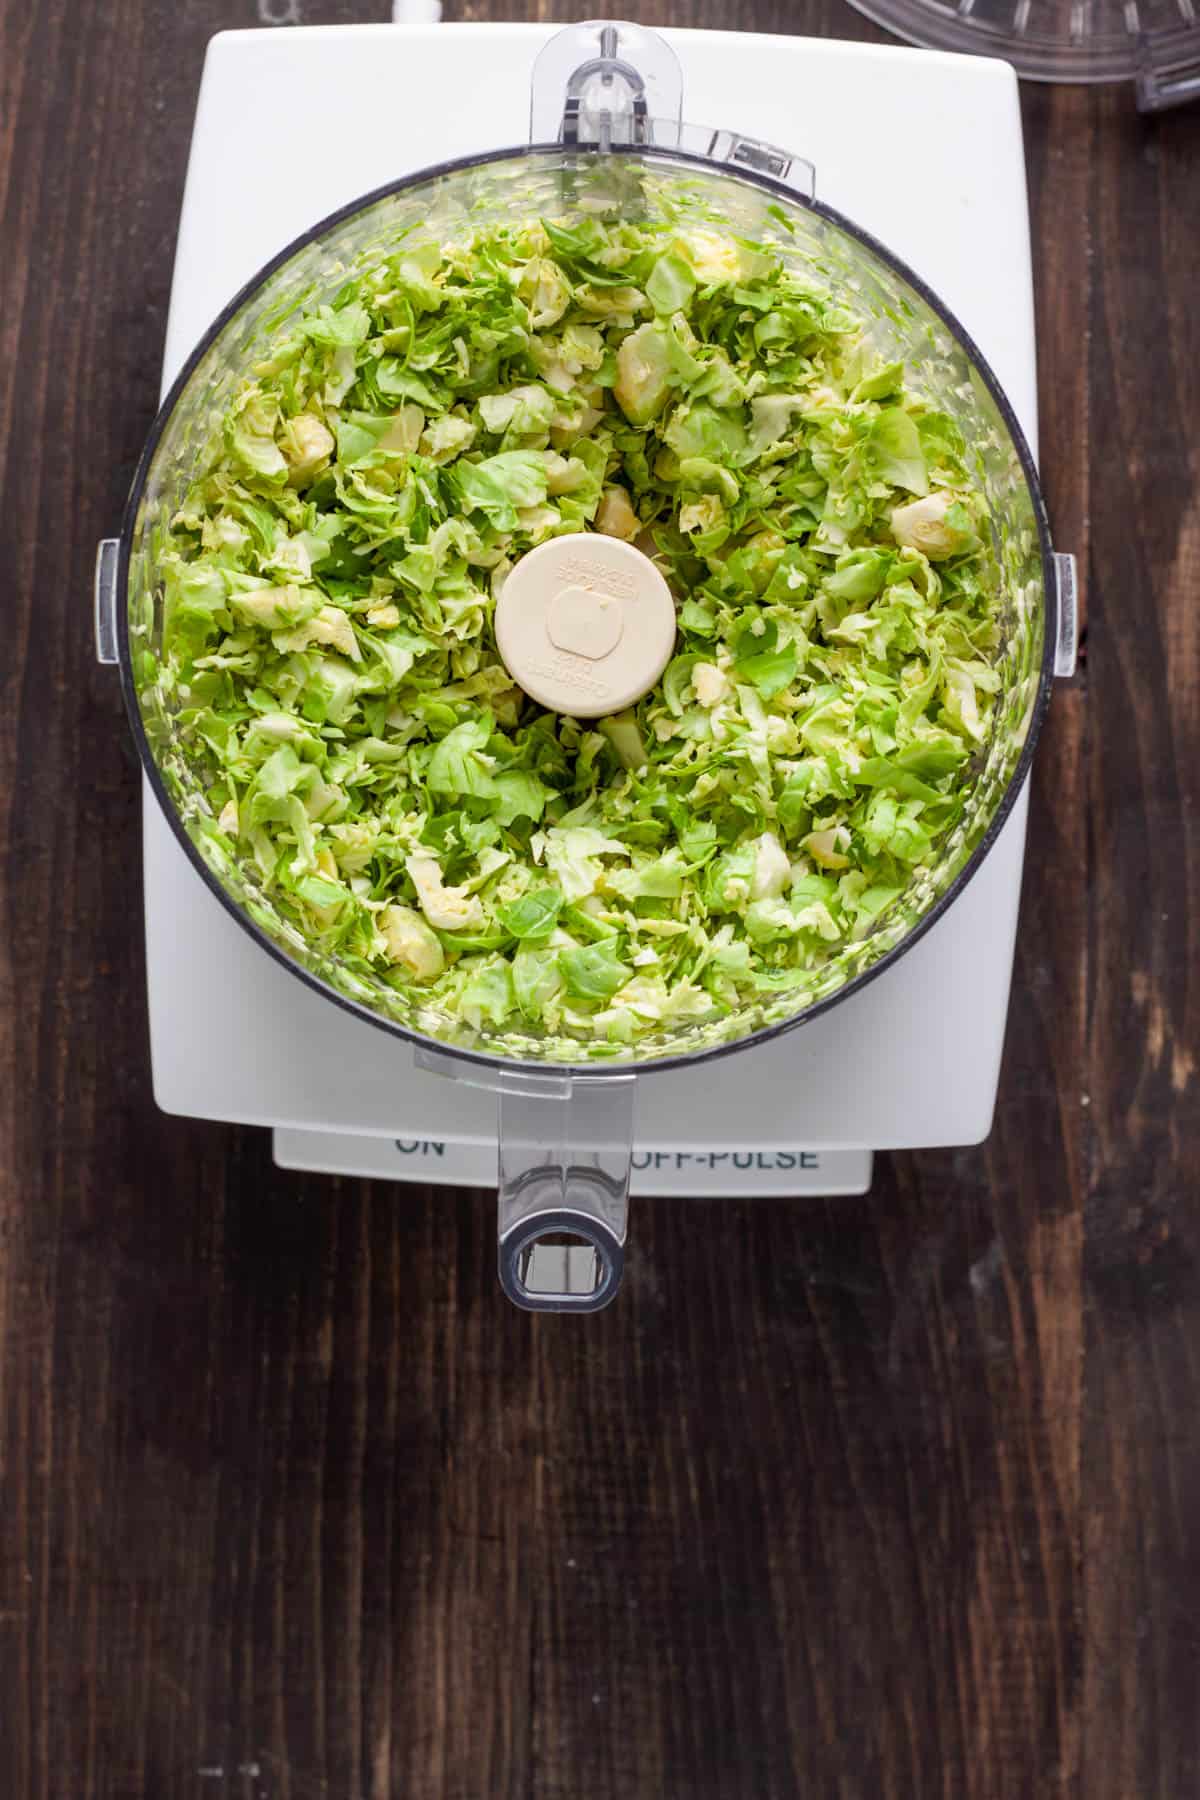 Shredded brussels sprouts in the base of a food processor.